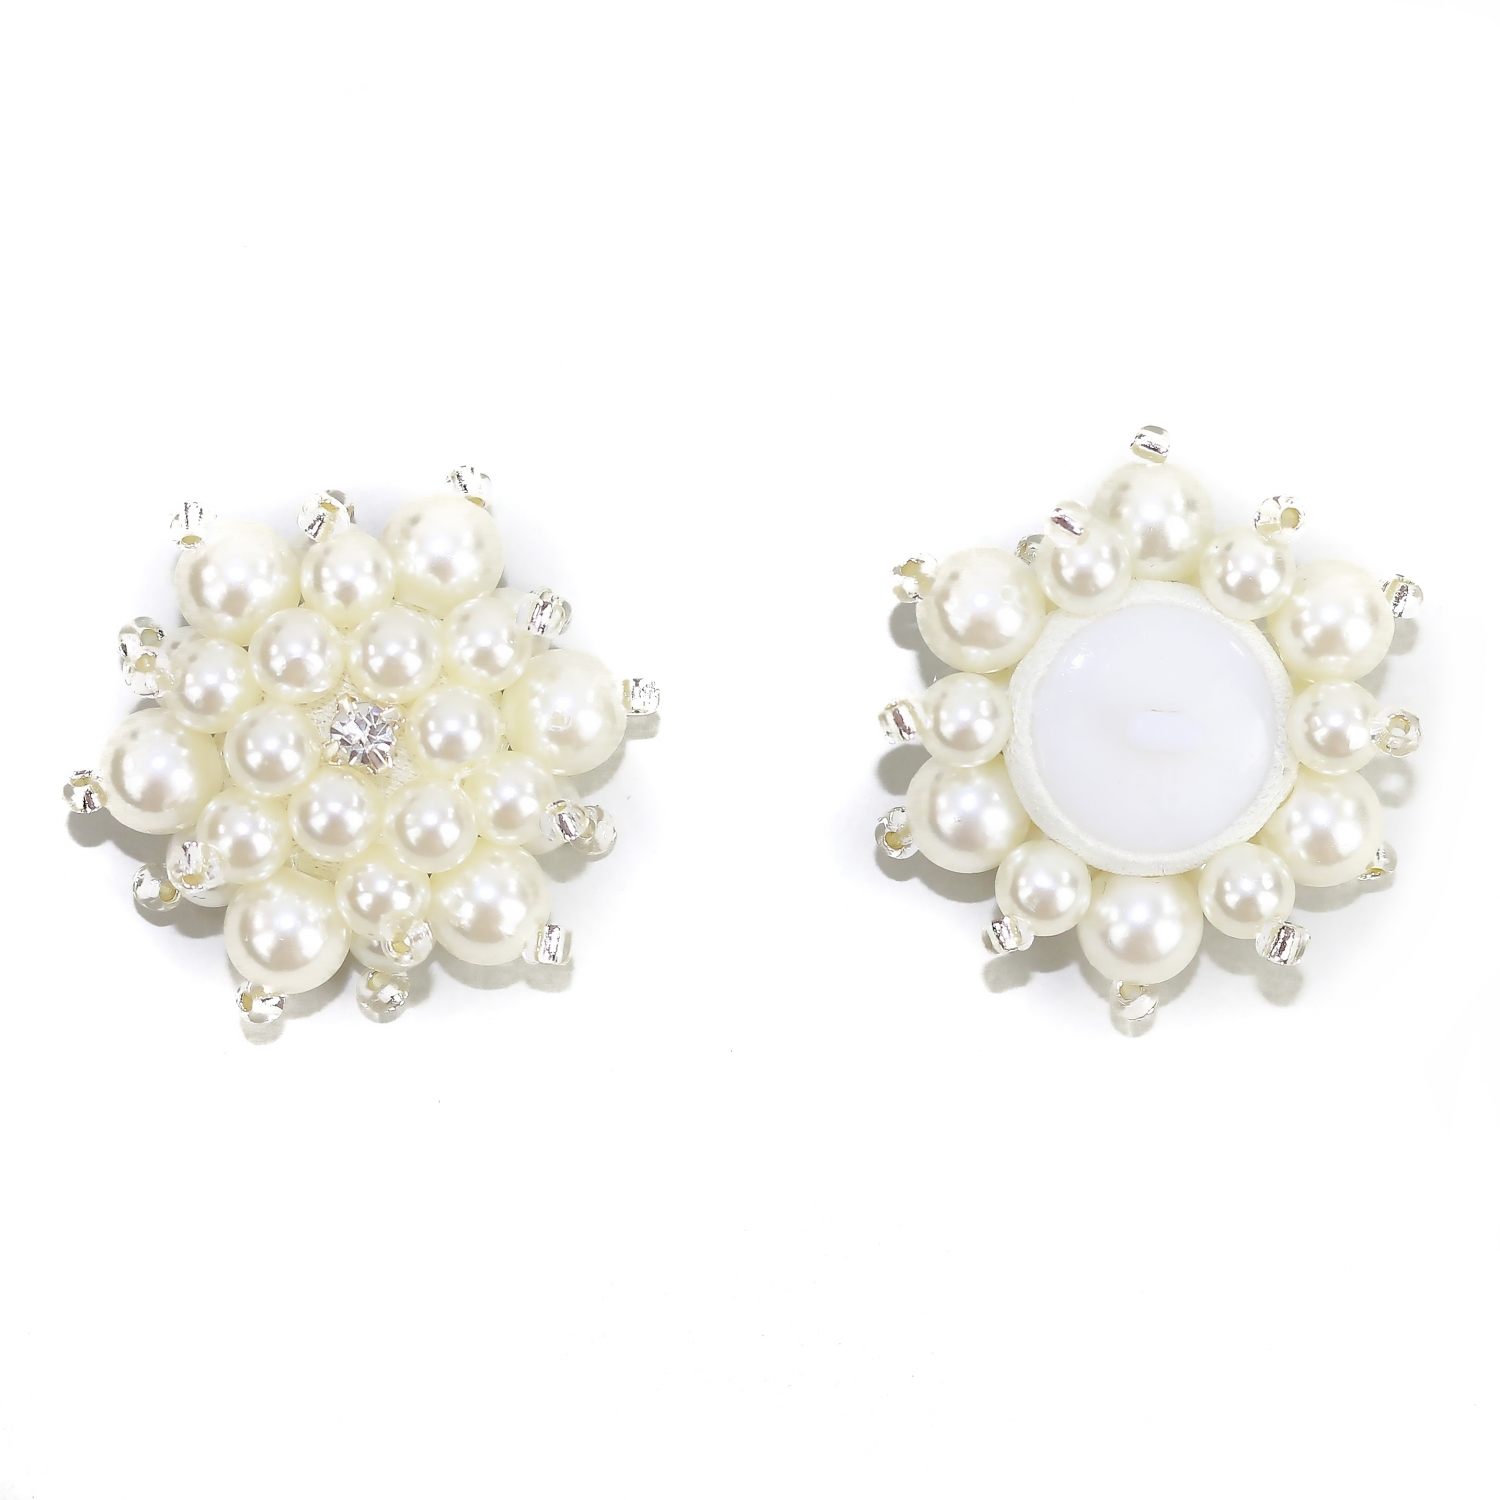 Shank Buttons with Pearls and Beads, 4 cm, Cream (10 pcs/pack) Code: BT0833